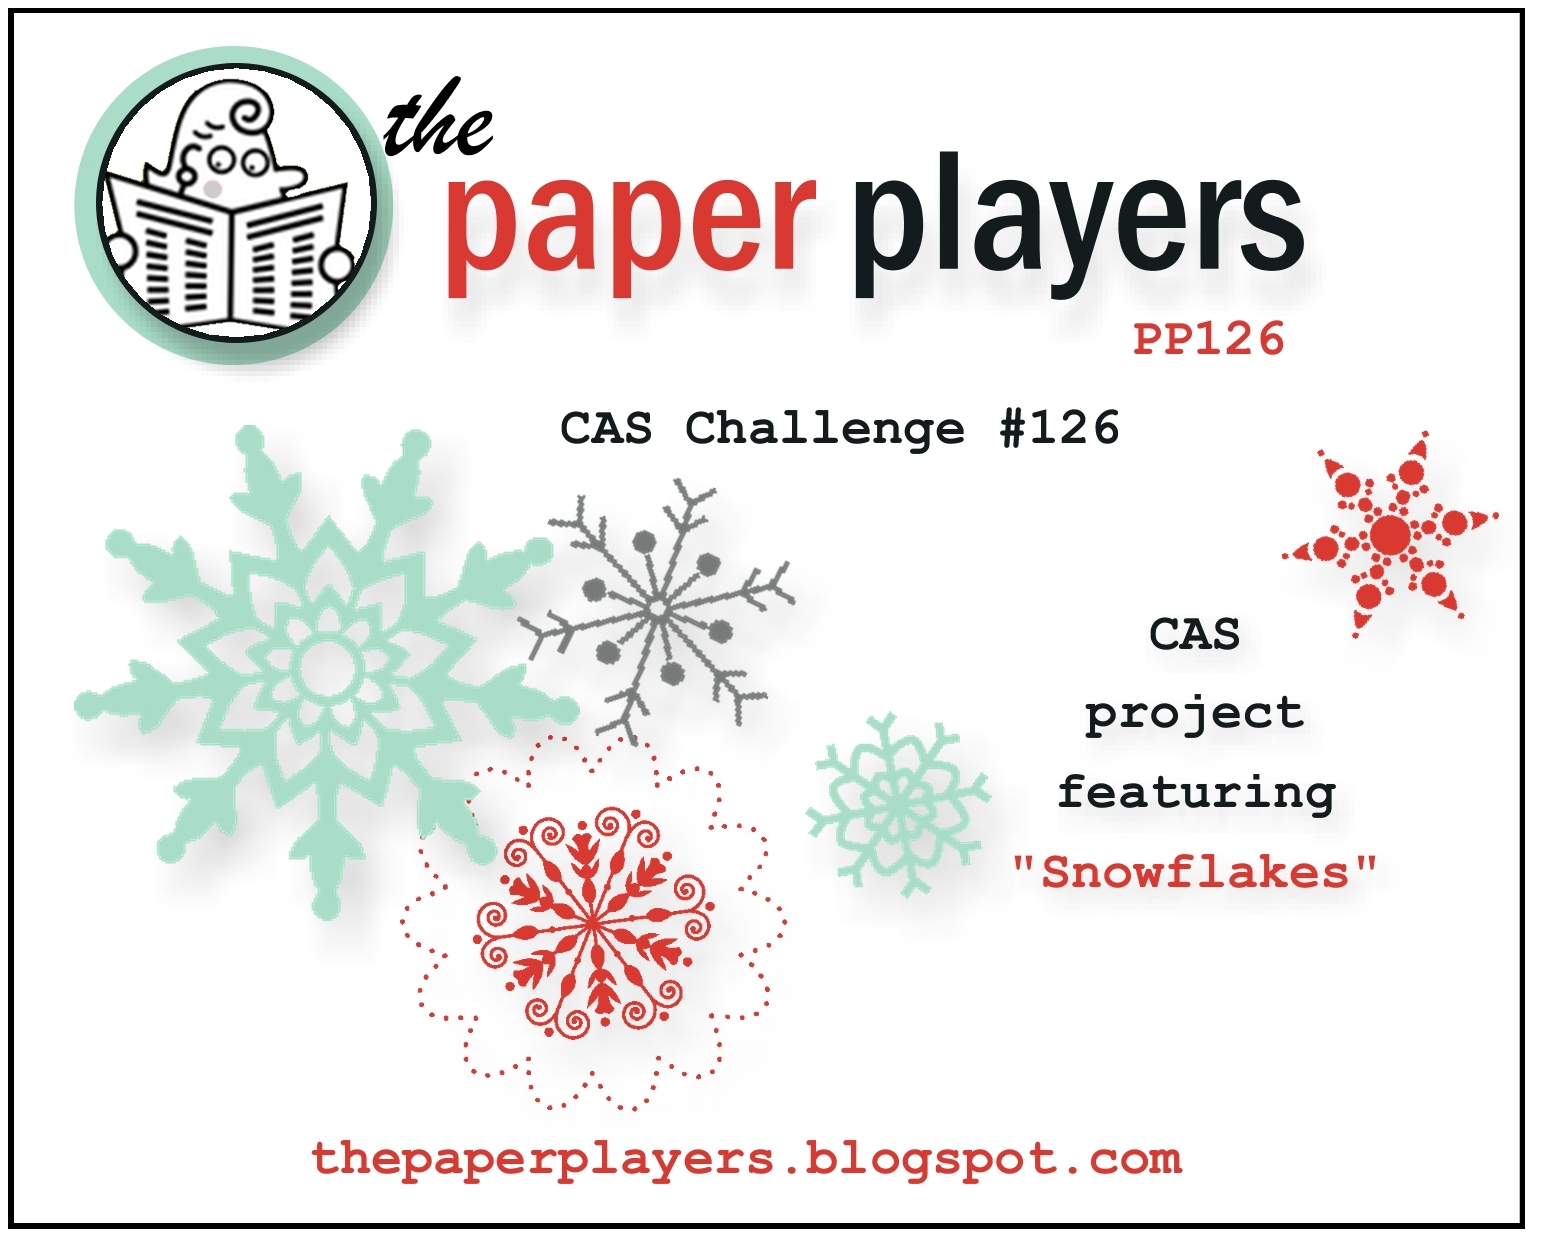 Snowflakes Play. Paper plays